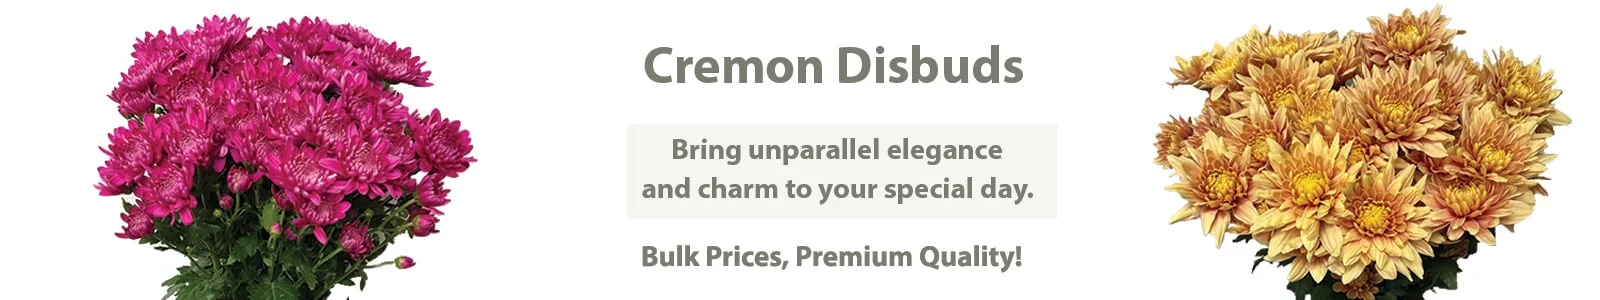 Cremon Disbuds for weddings, adding a touch of elegance and charm to wedding floral arrangements.